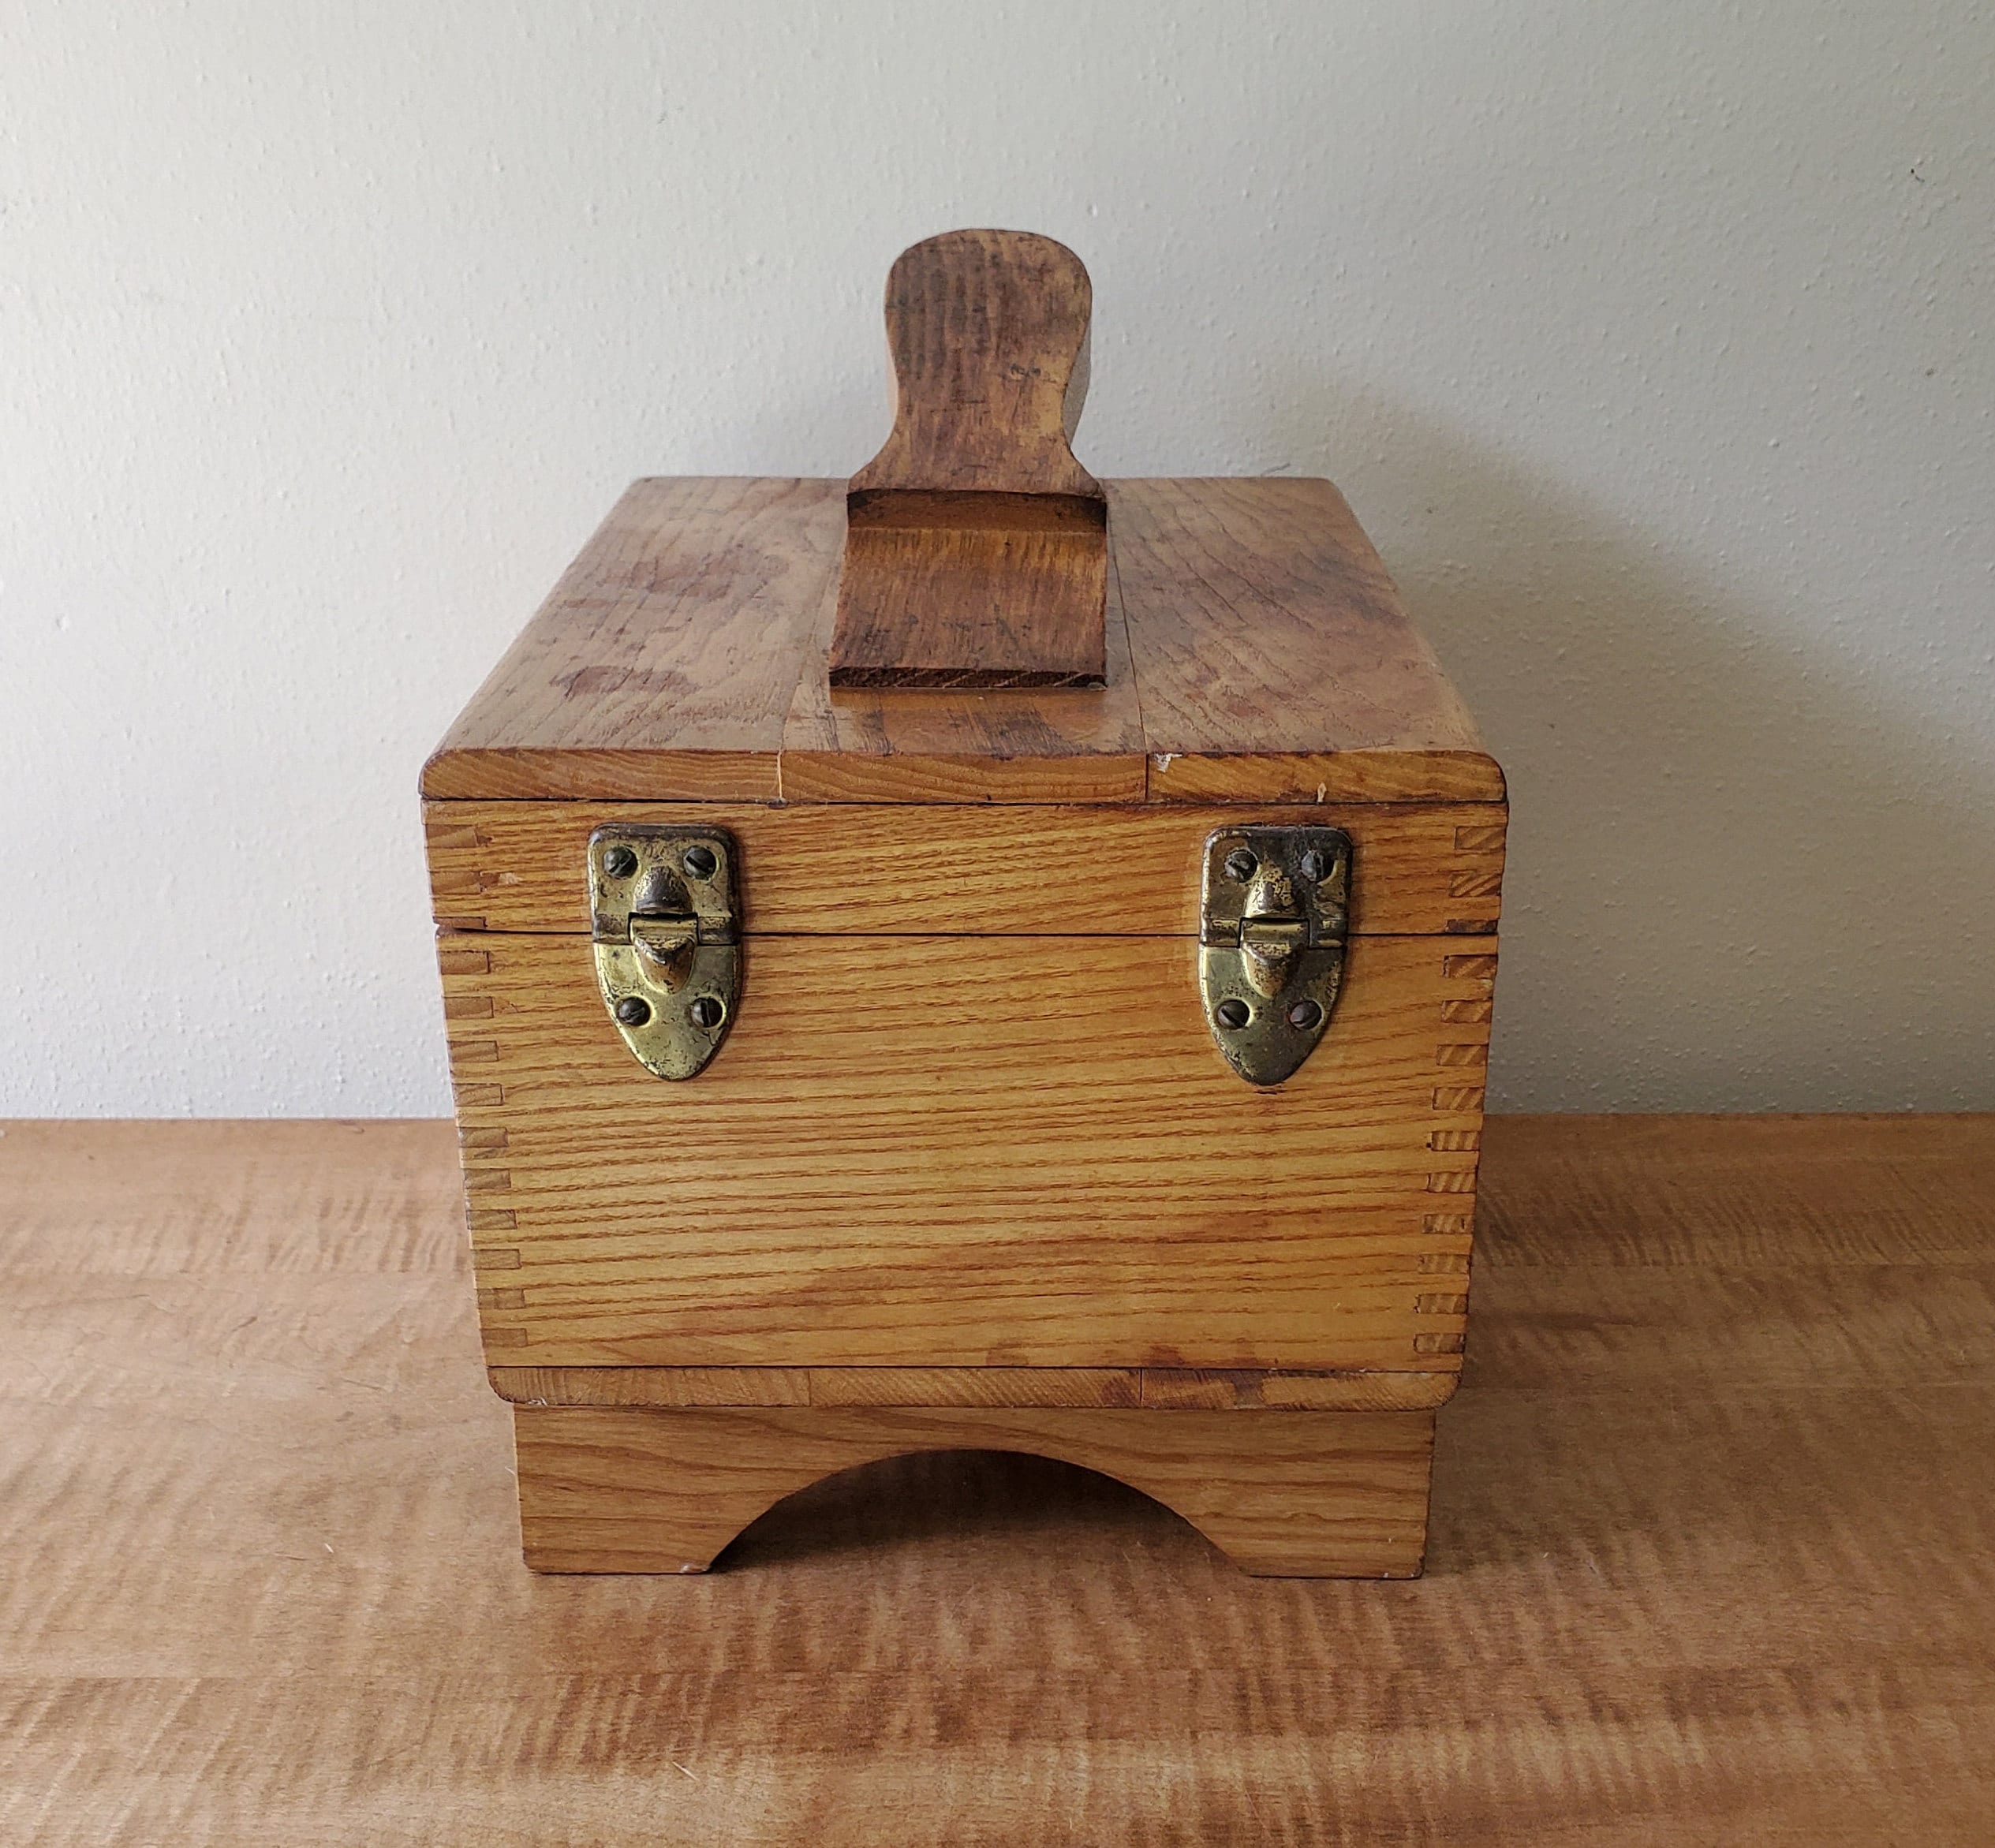 Thrifted Treasures Series Part 8 - Toy Shoe Shine Box — Made on 23rd